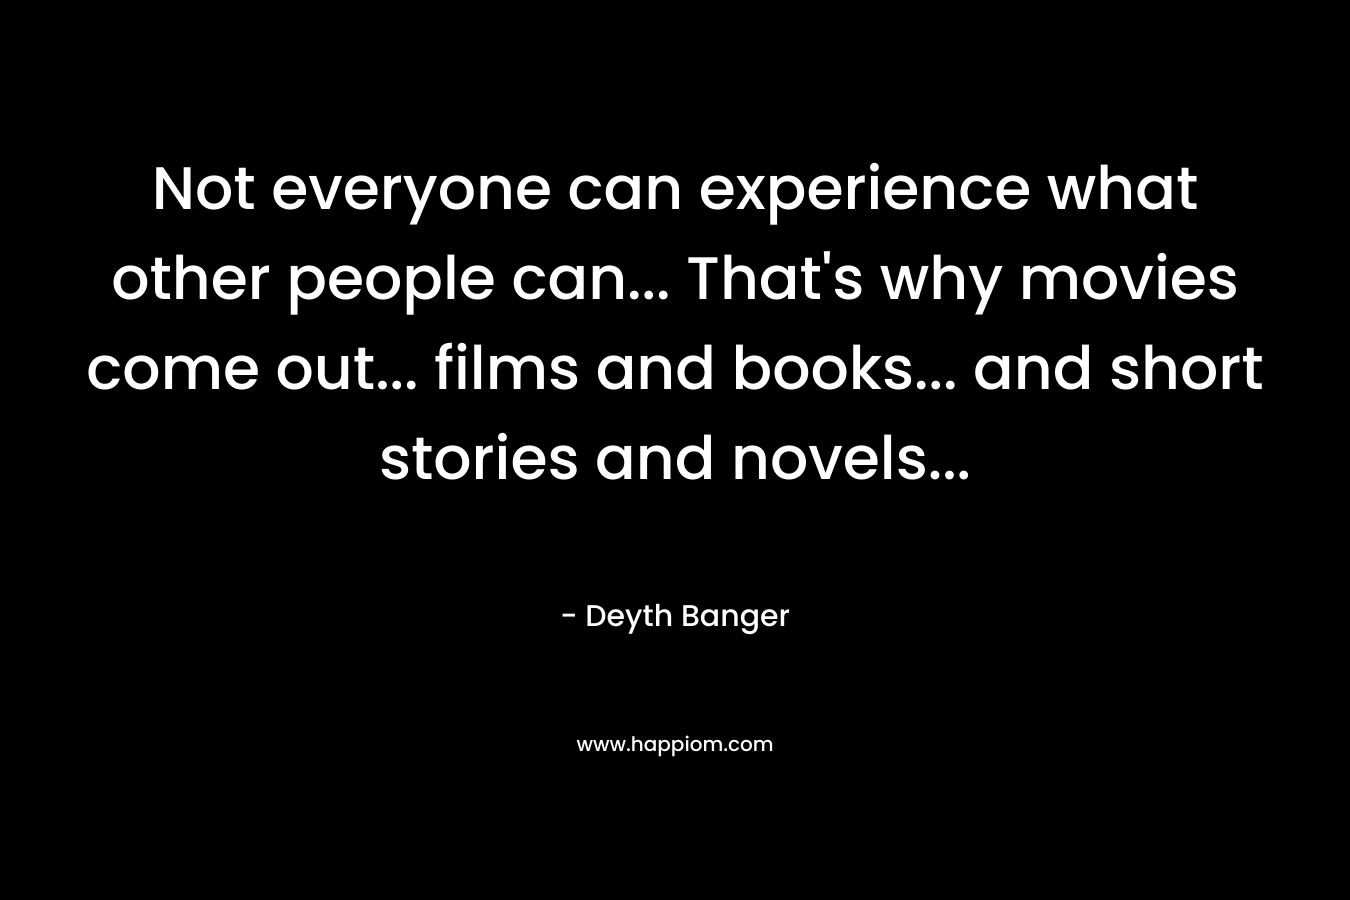 Not everyone can experience what other people can... That's why movies come out... films and books... and short stories and novels...